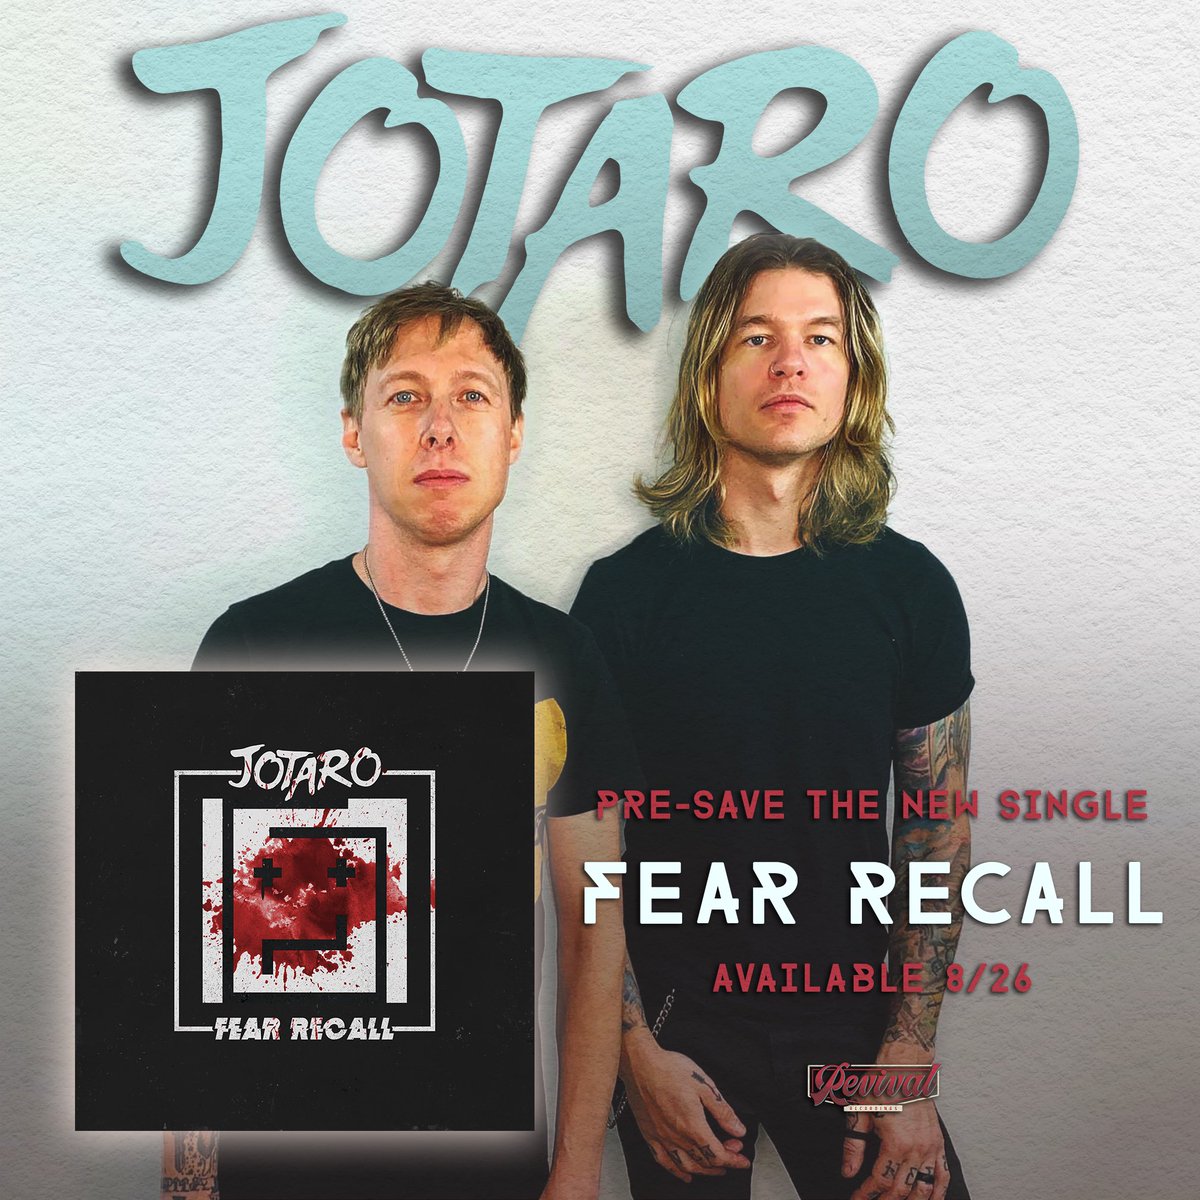 The debut single from @jotaroband will be out everywhere this Friday! Pre-save “Fear Recall” now at the link🤘🏼 bit.ly/3QZ3FvU